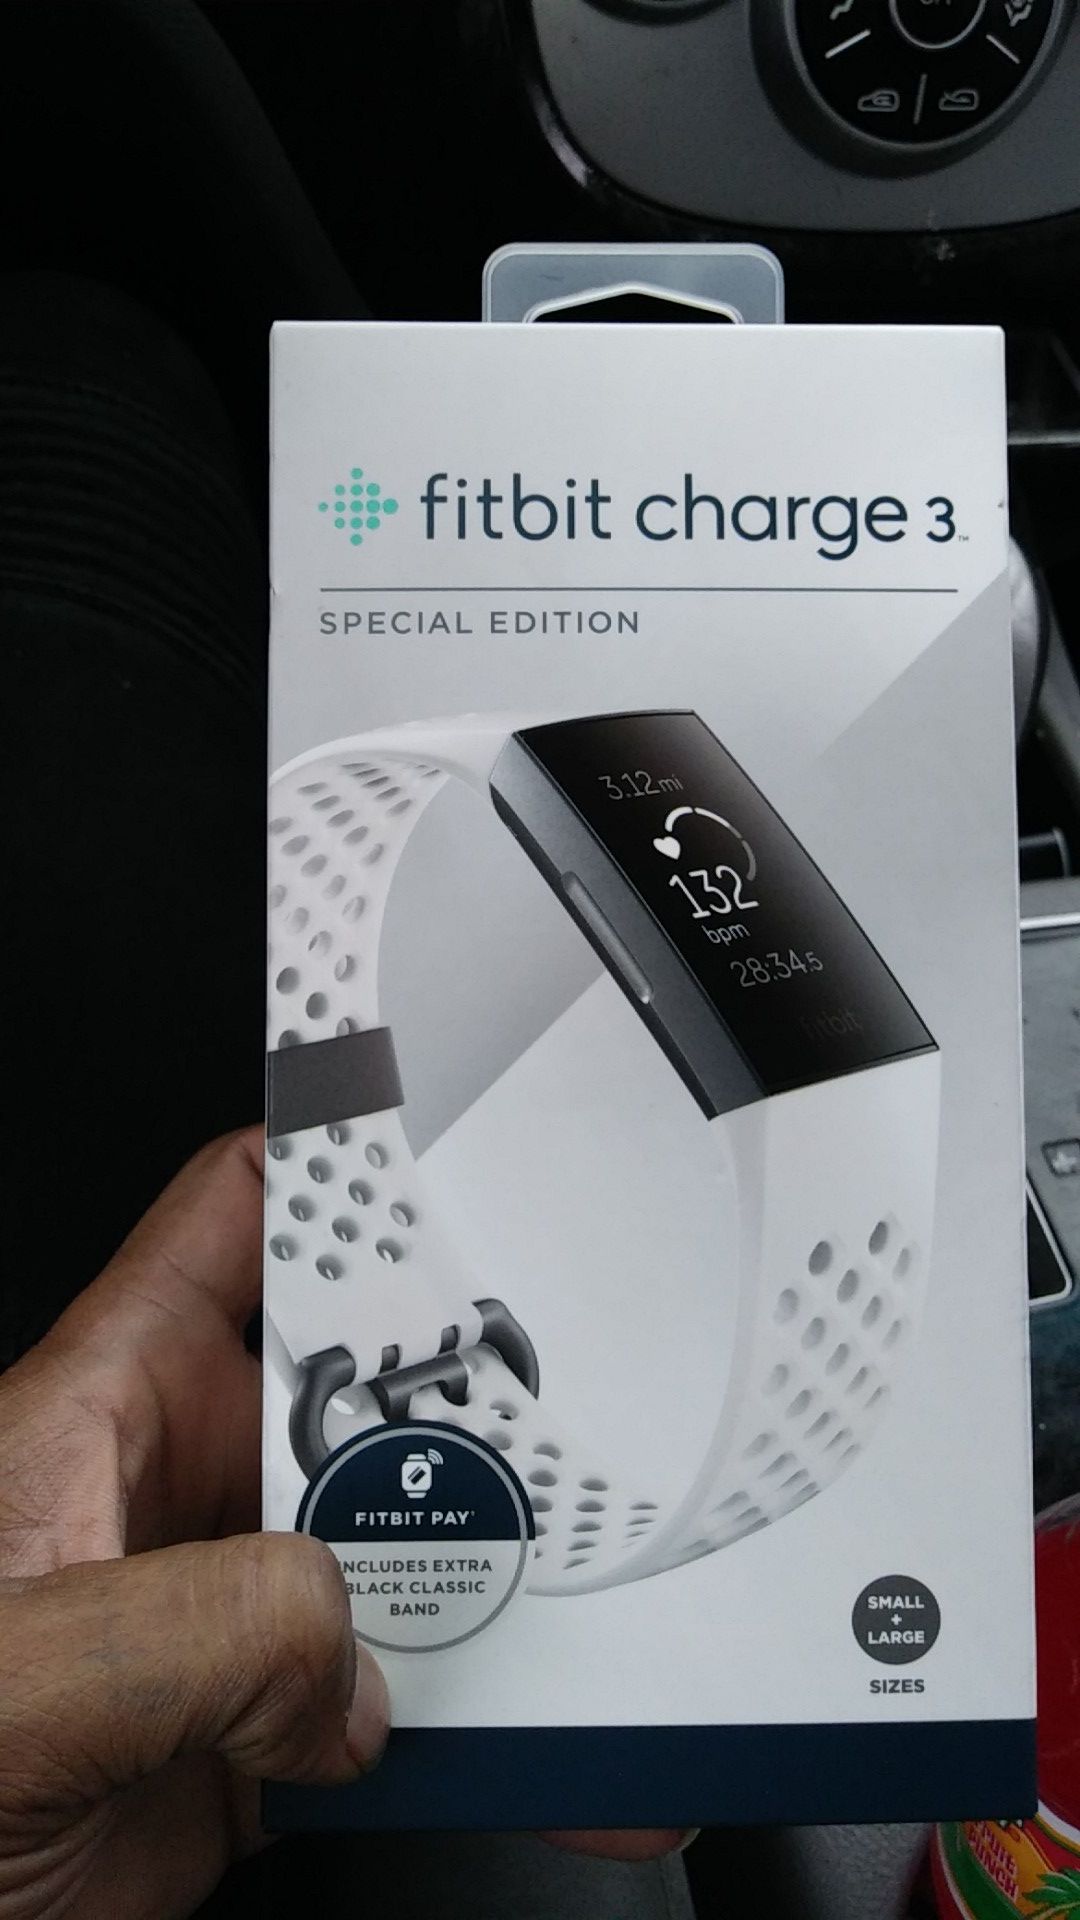 New Special edition fitbit charge 3